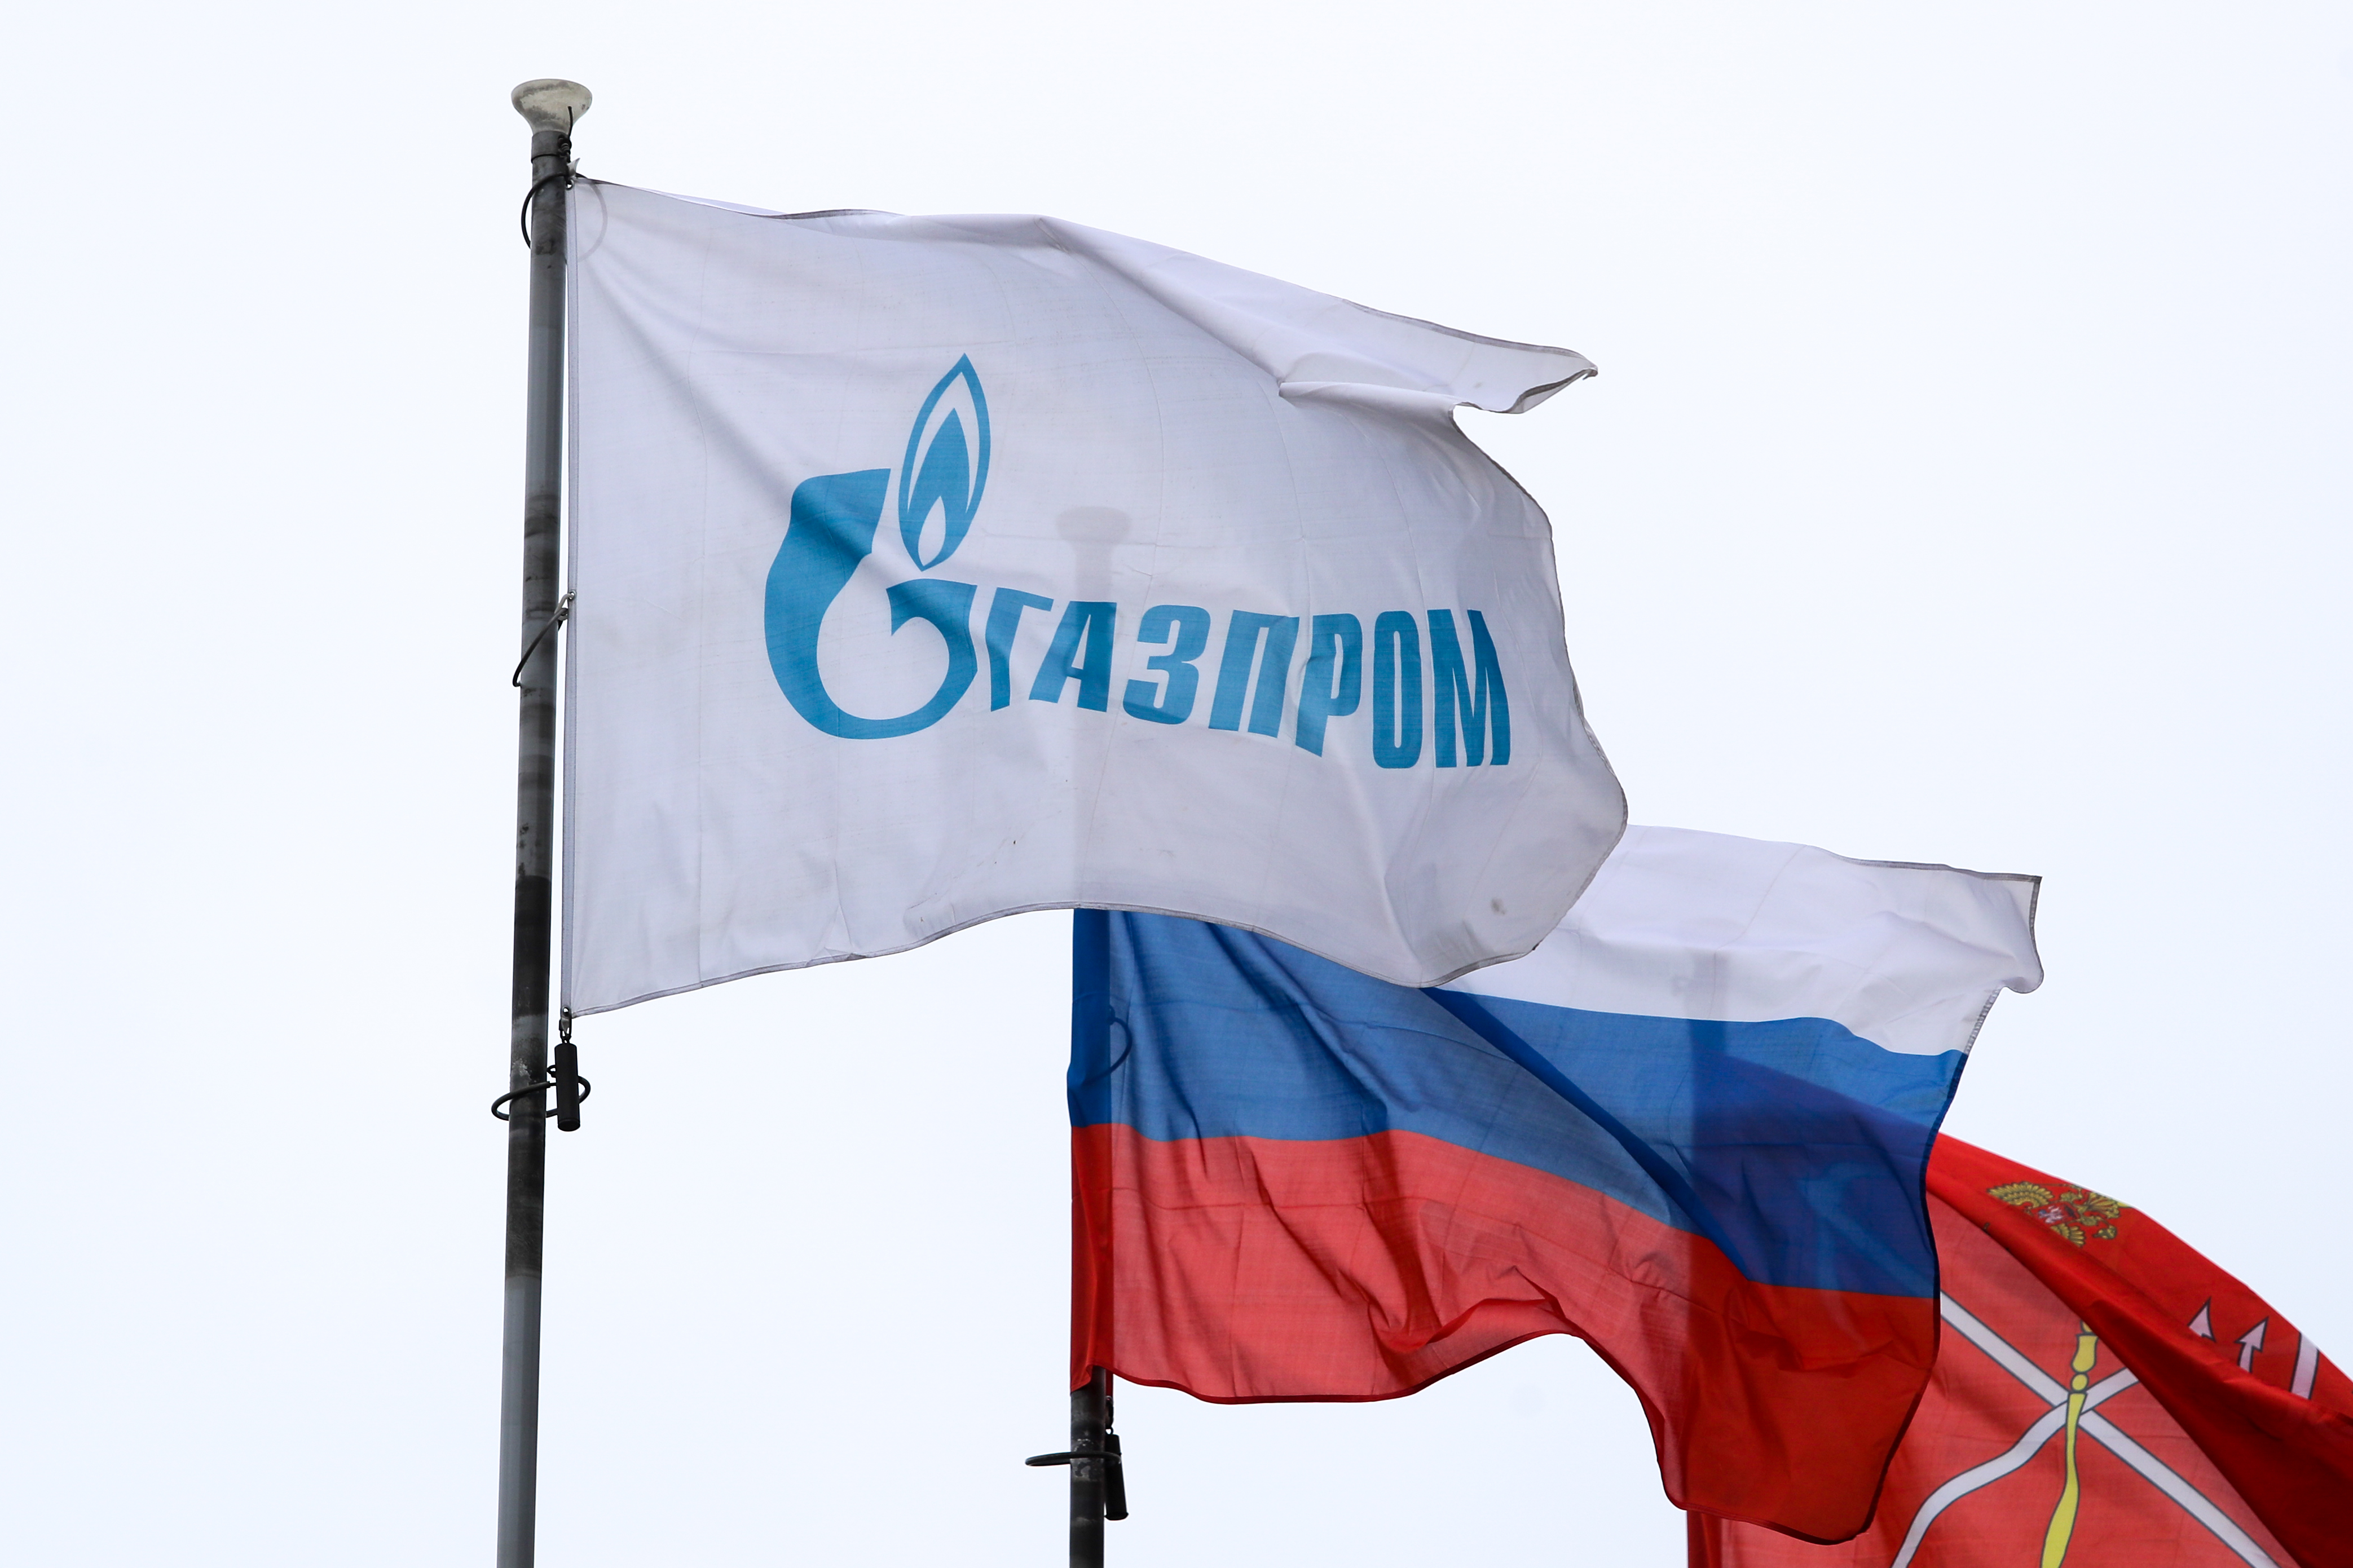 A flag with the Gazprom logo. (Photo by Igor Russak/picture alliance via Getty Images)